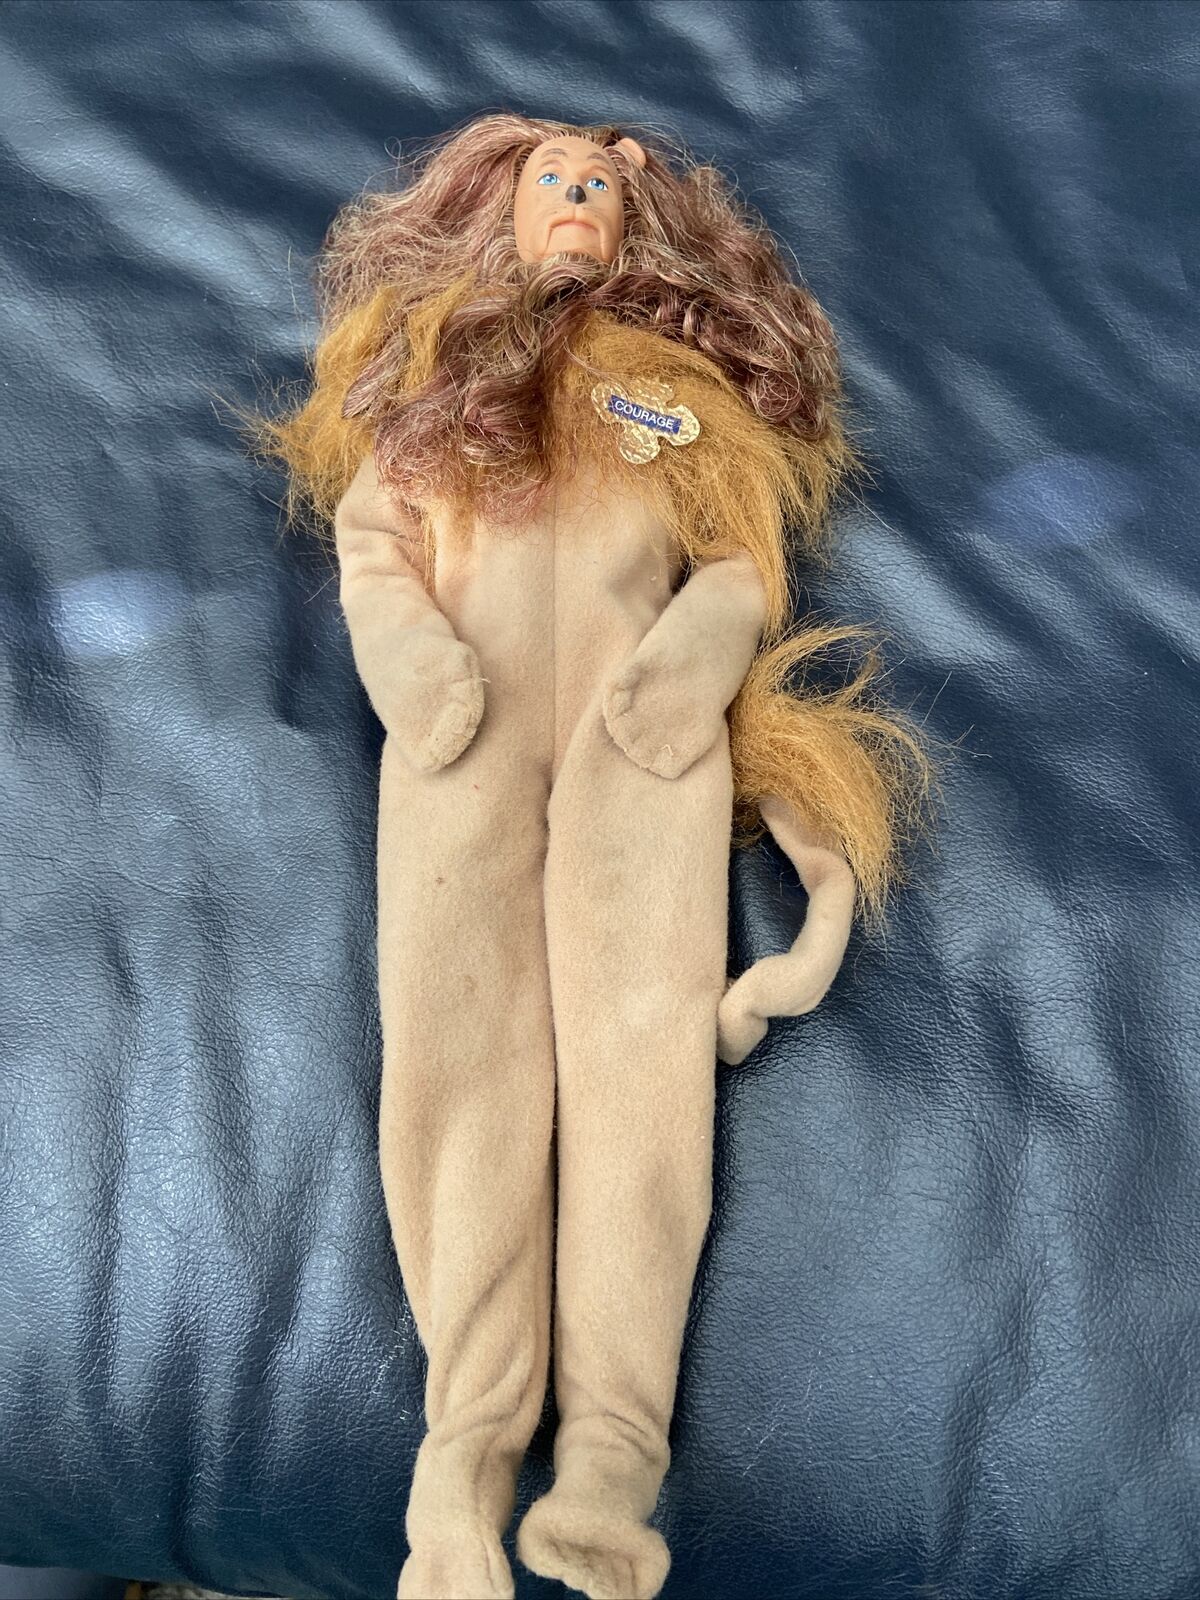 Mattel 1996 Ken As Cowardly Lion The Wizard Of Oz Doll Action Figure 12" Toy